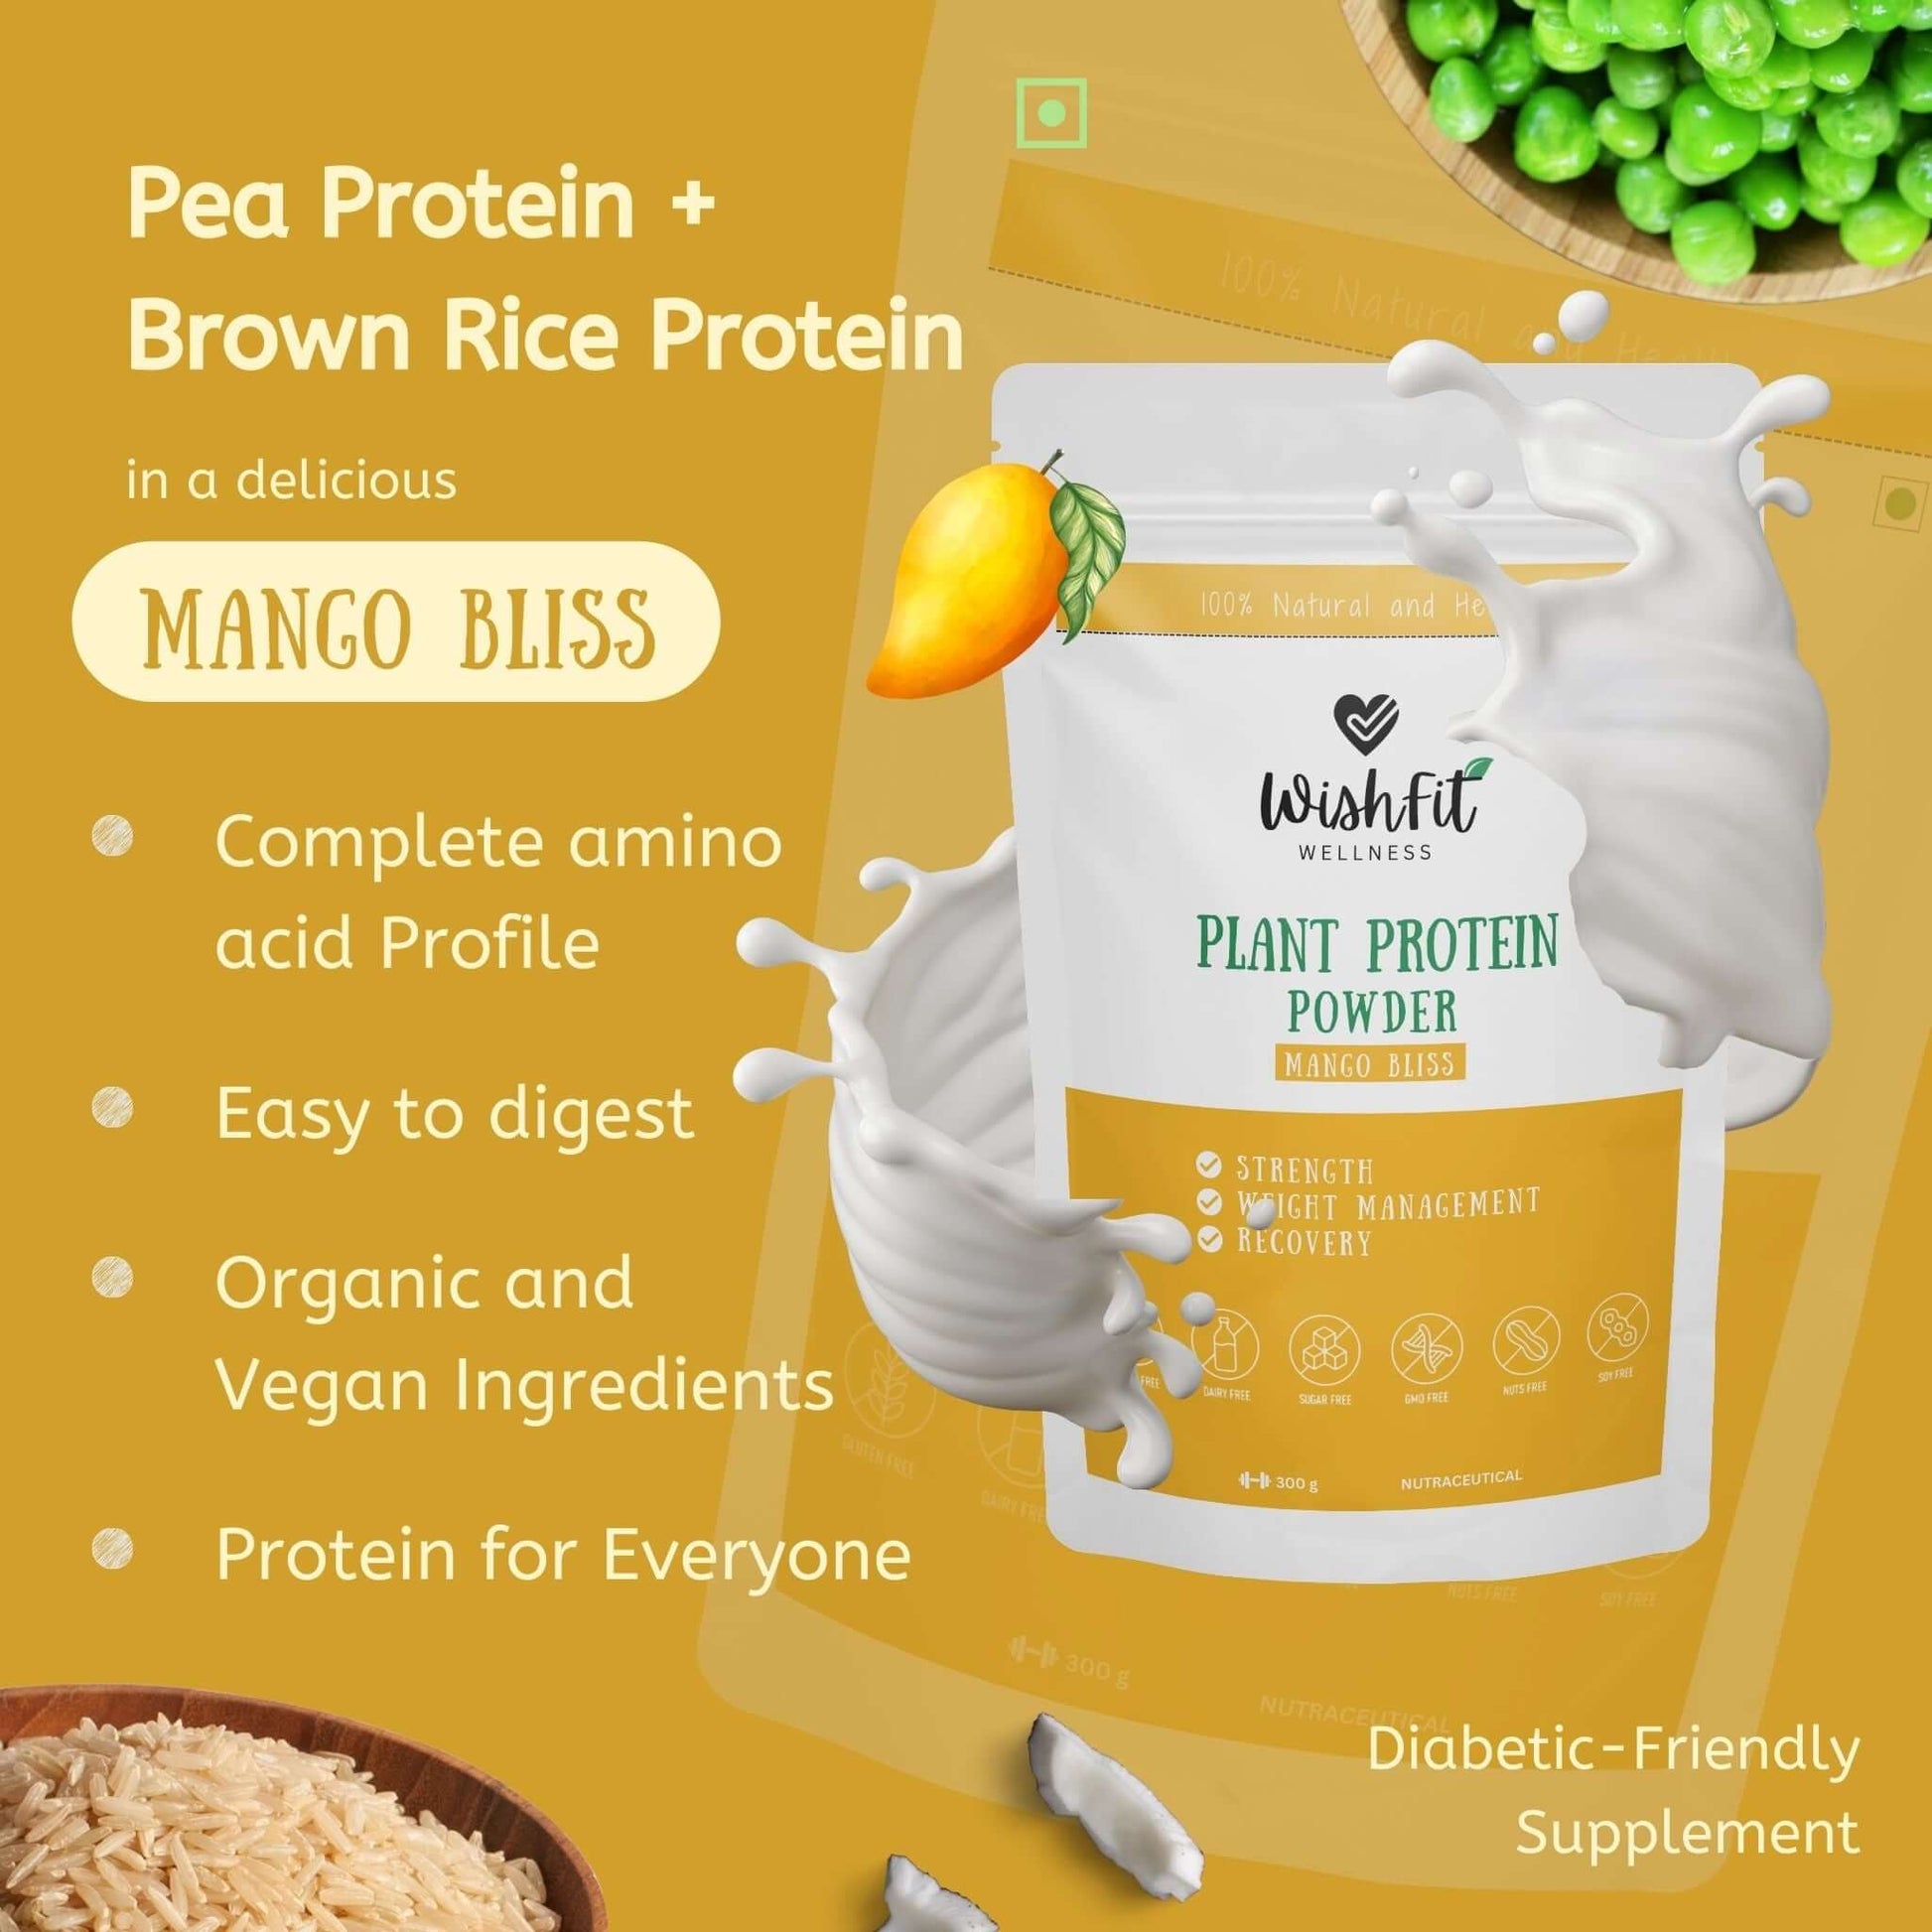  Pea protein and brown rice protien benefits